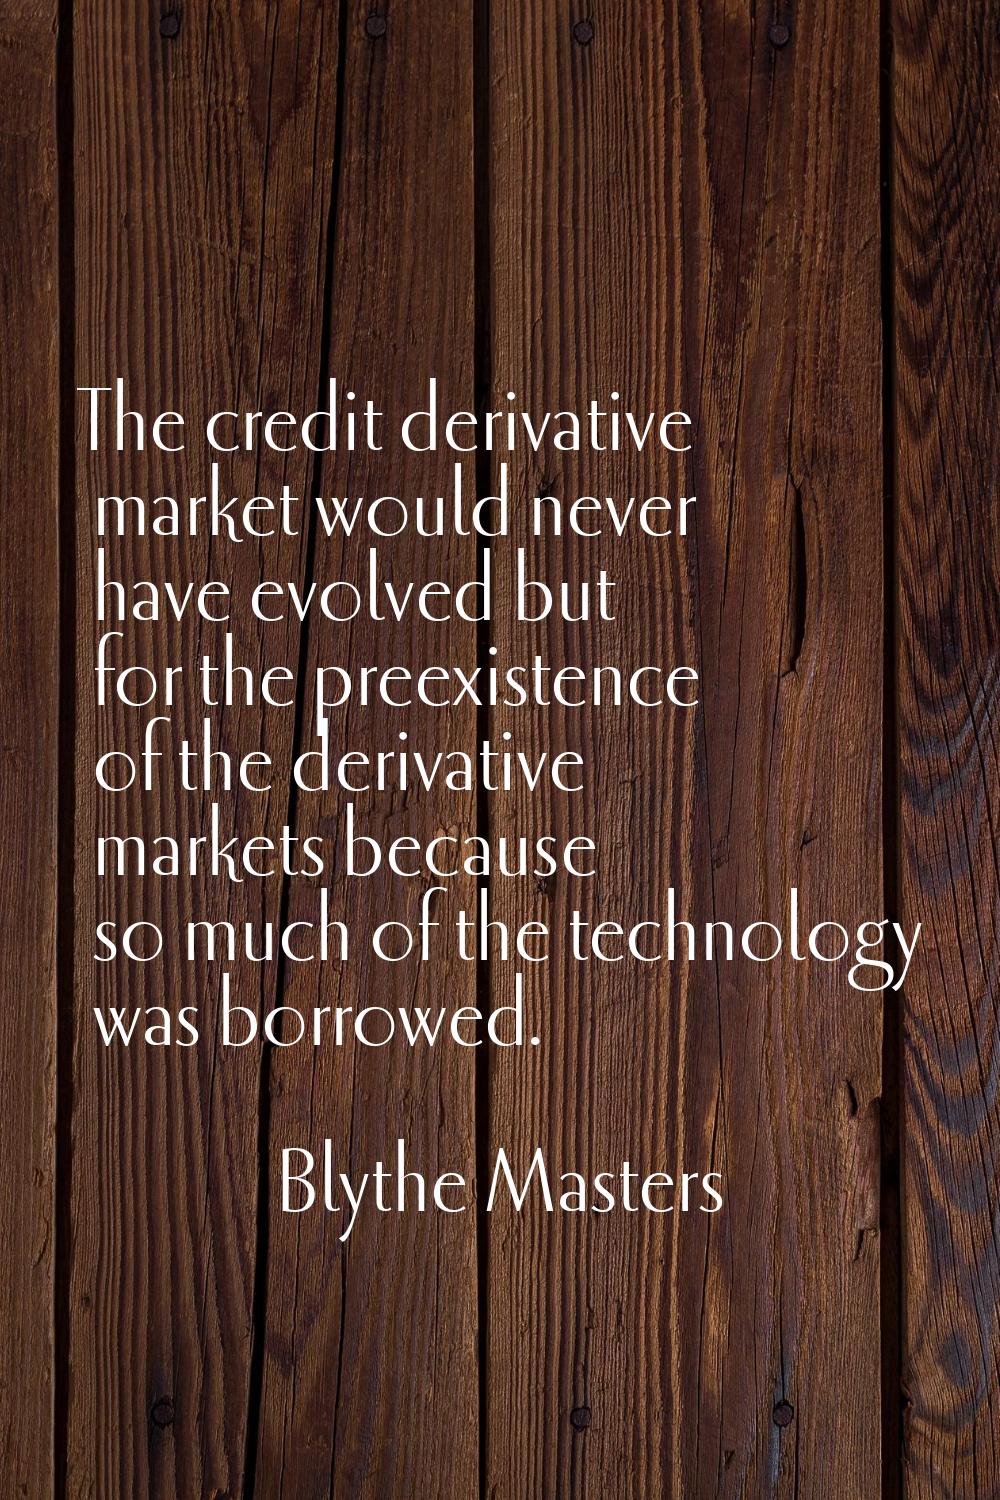 The credit derivative market would never have evolved but for the preexistence of the derivative ma